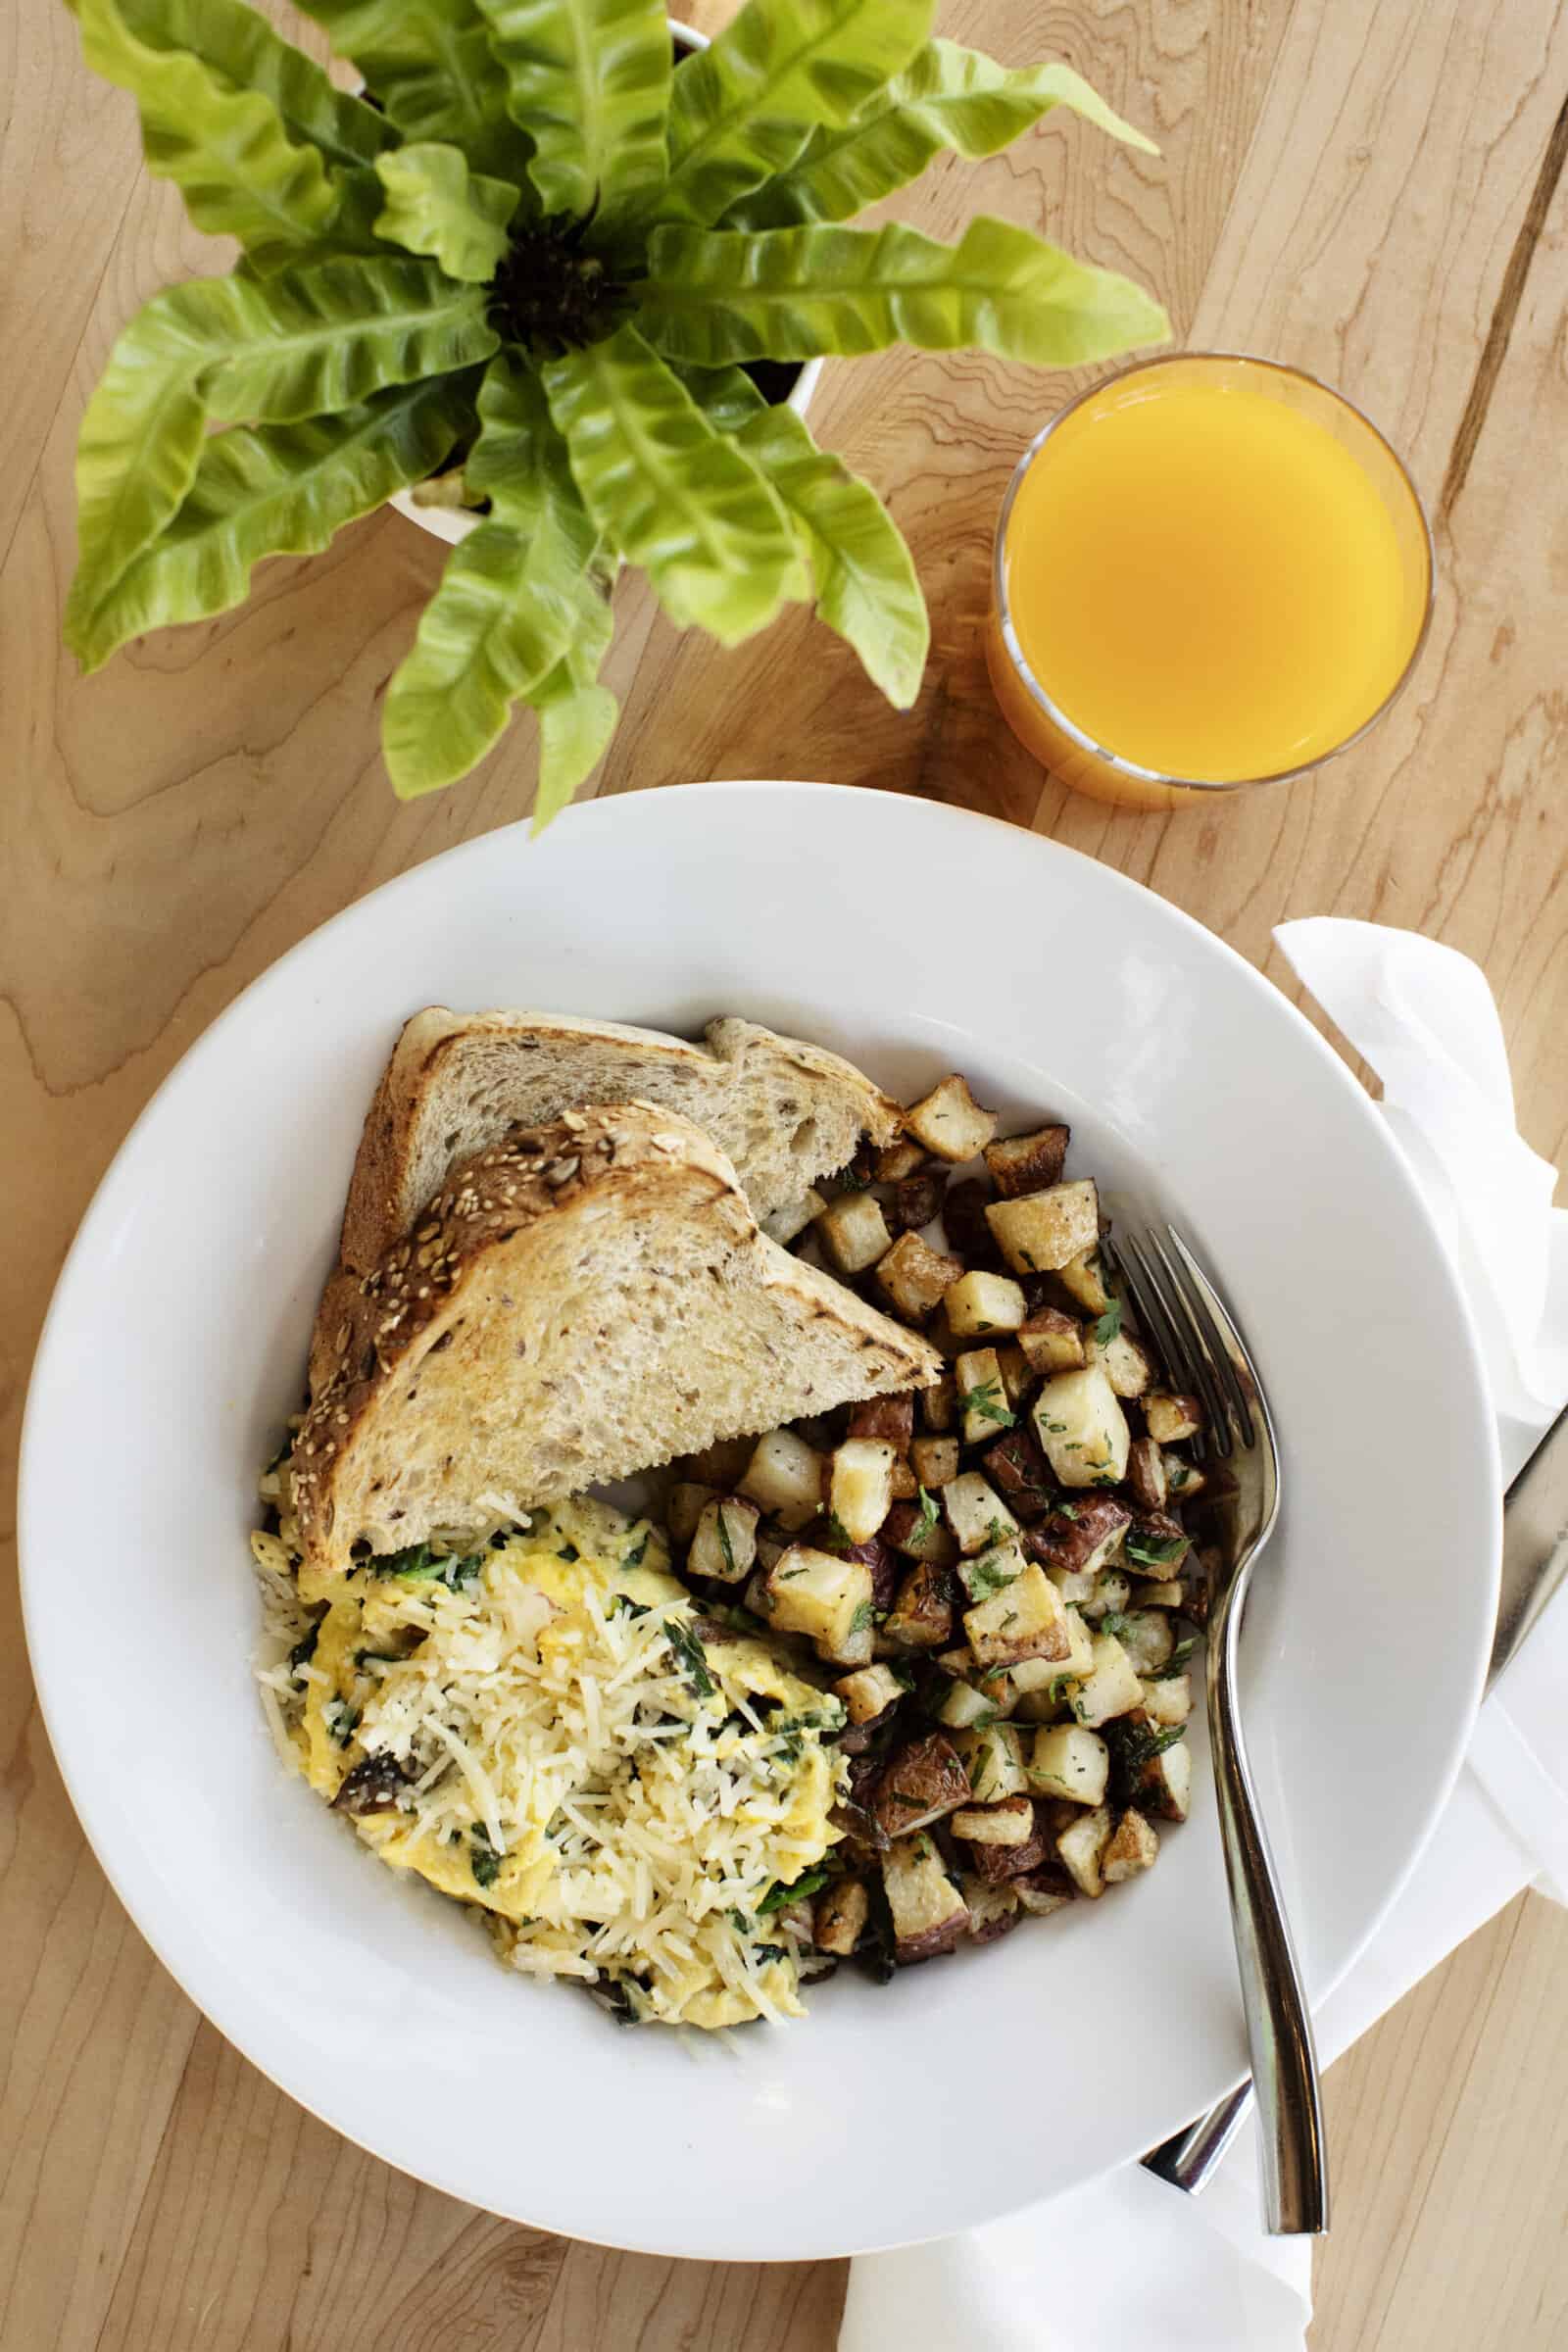 fall scramble, a popular breakfast entree at yum! Kitchen and Bakery in Minnesota